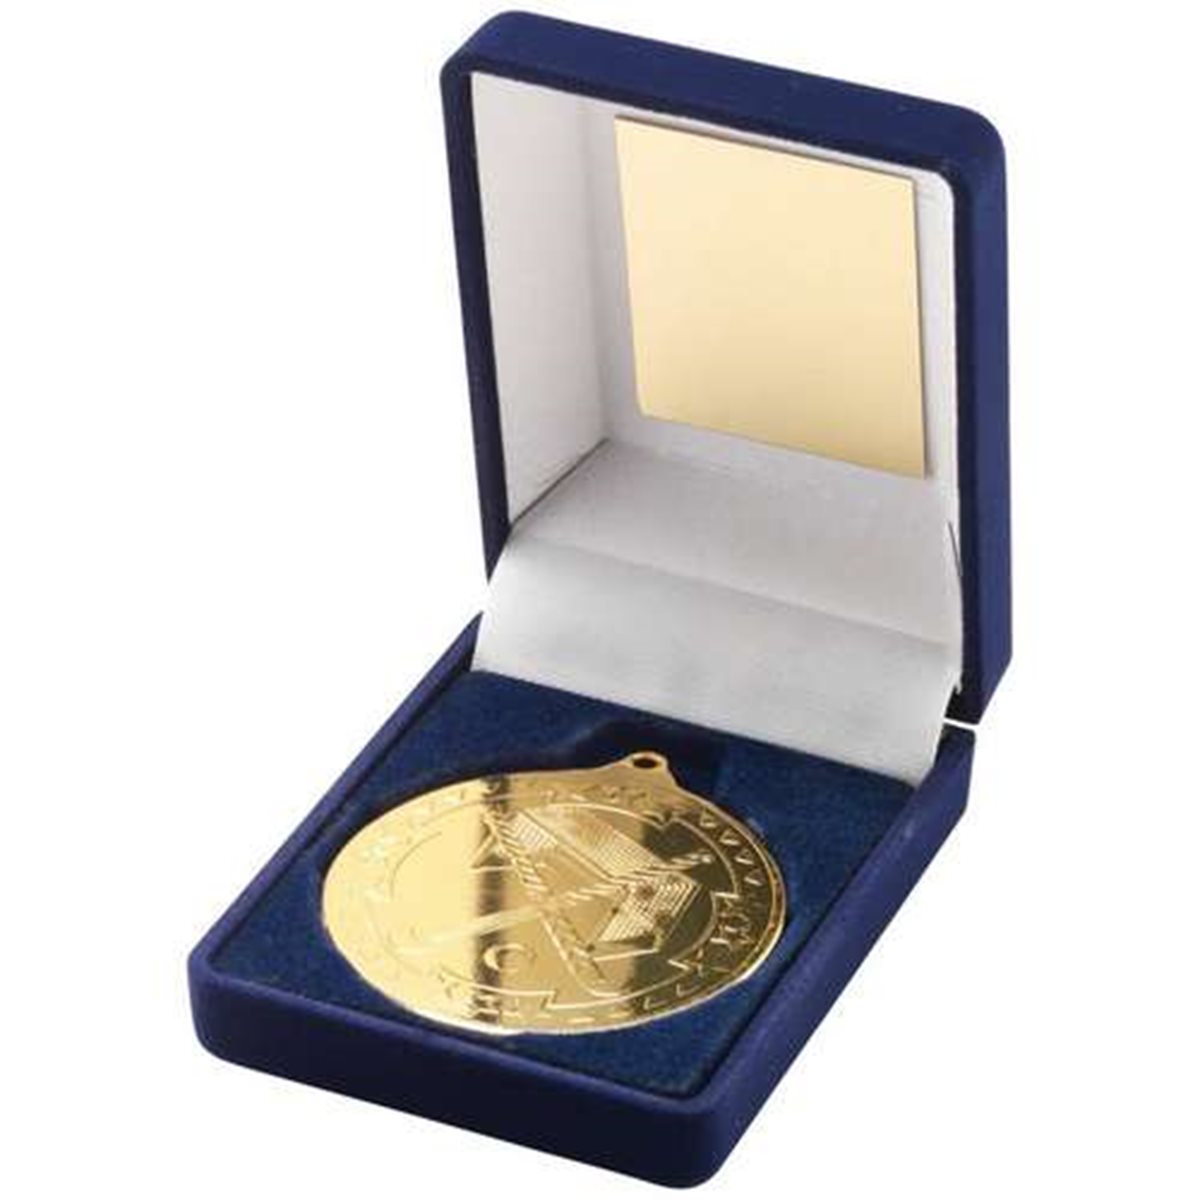 Hockey 50mm Gold Boxed Medal JR18-TY130A